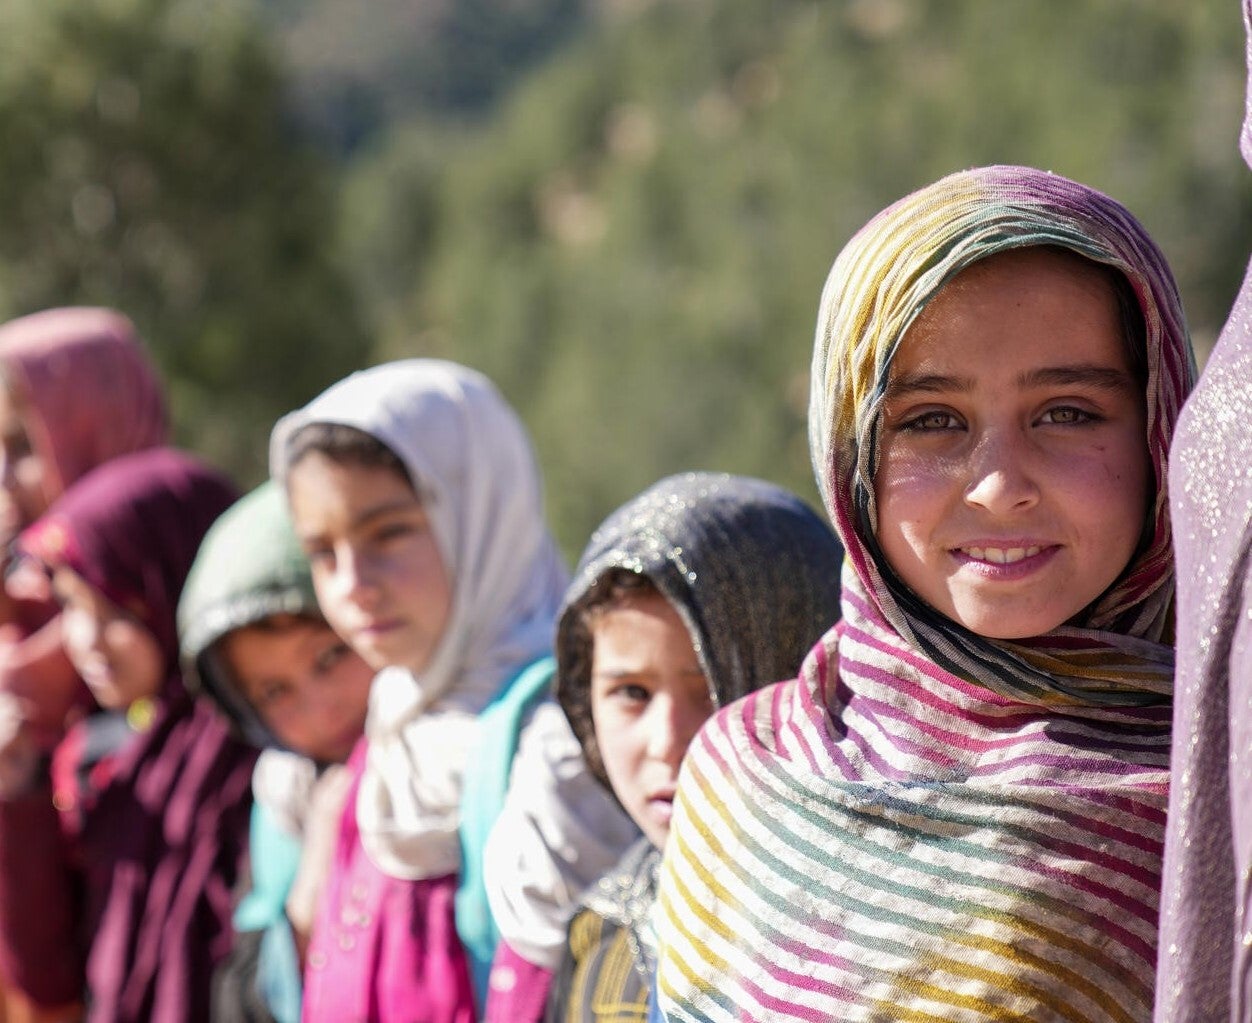 A girl in Afghanistan looks at the camera